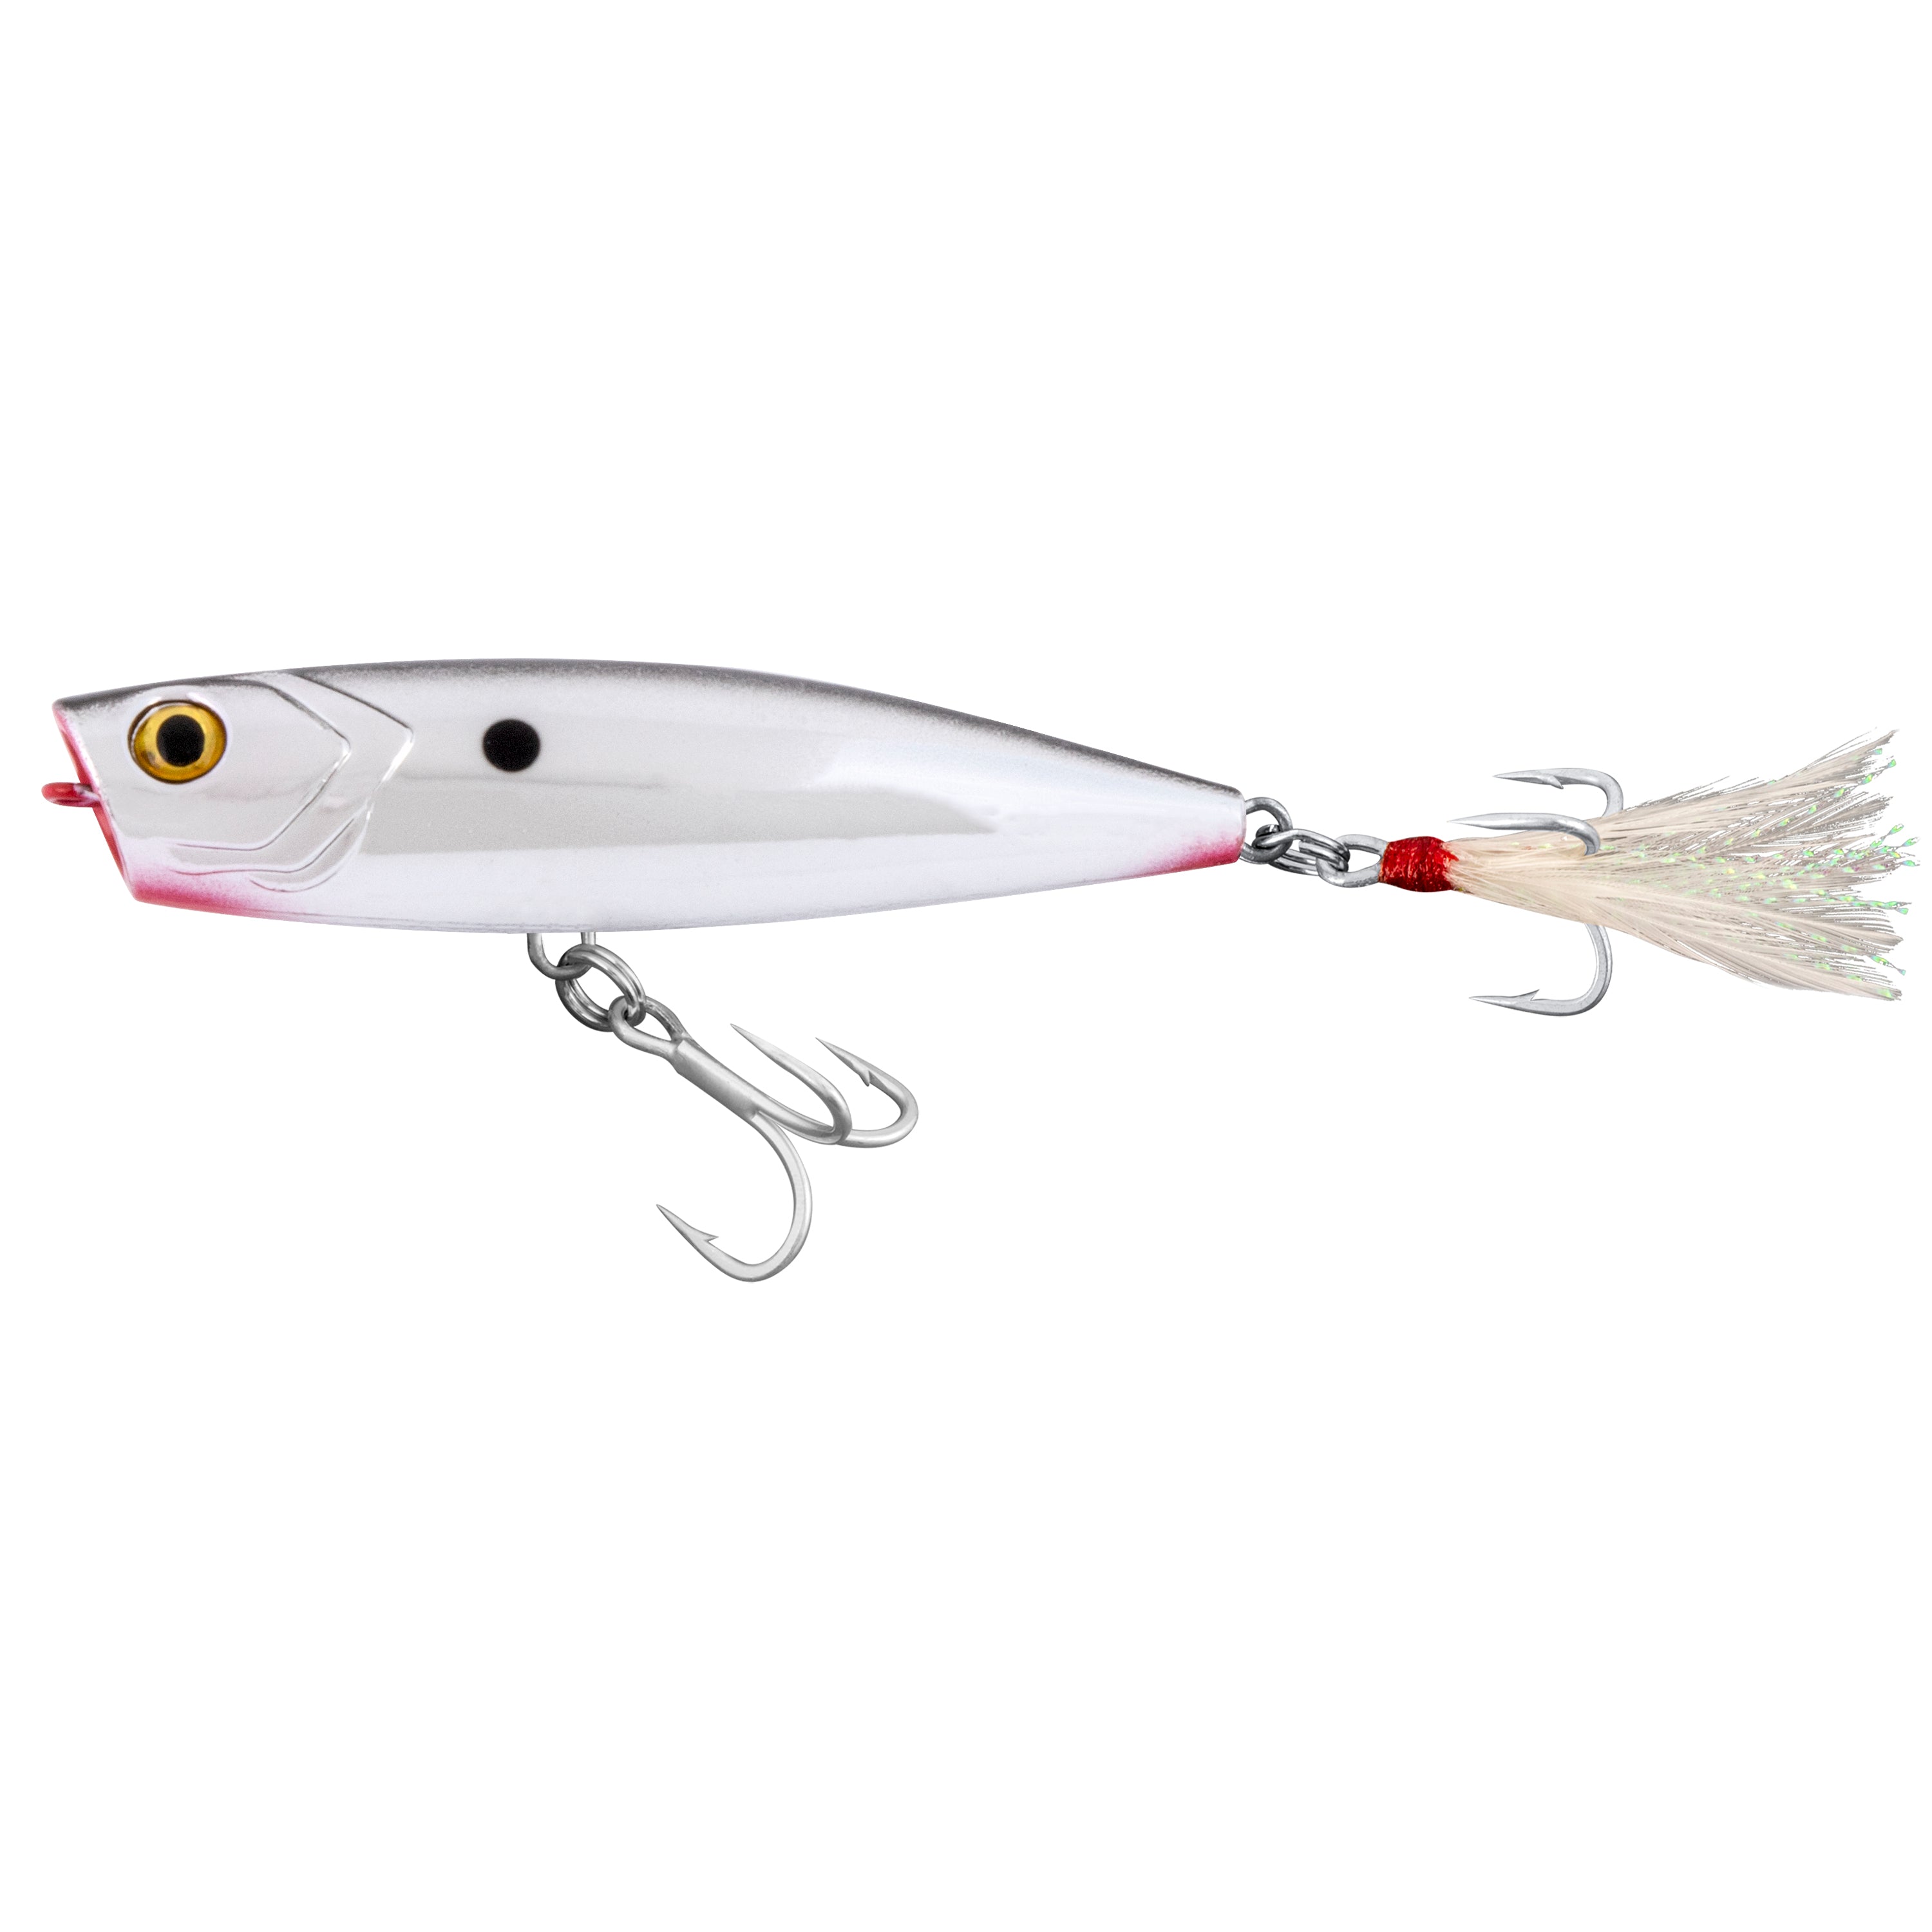 Tsunami Tidal Pro Baits target any saltwater species from stripers